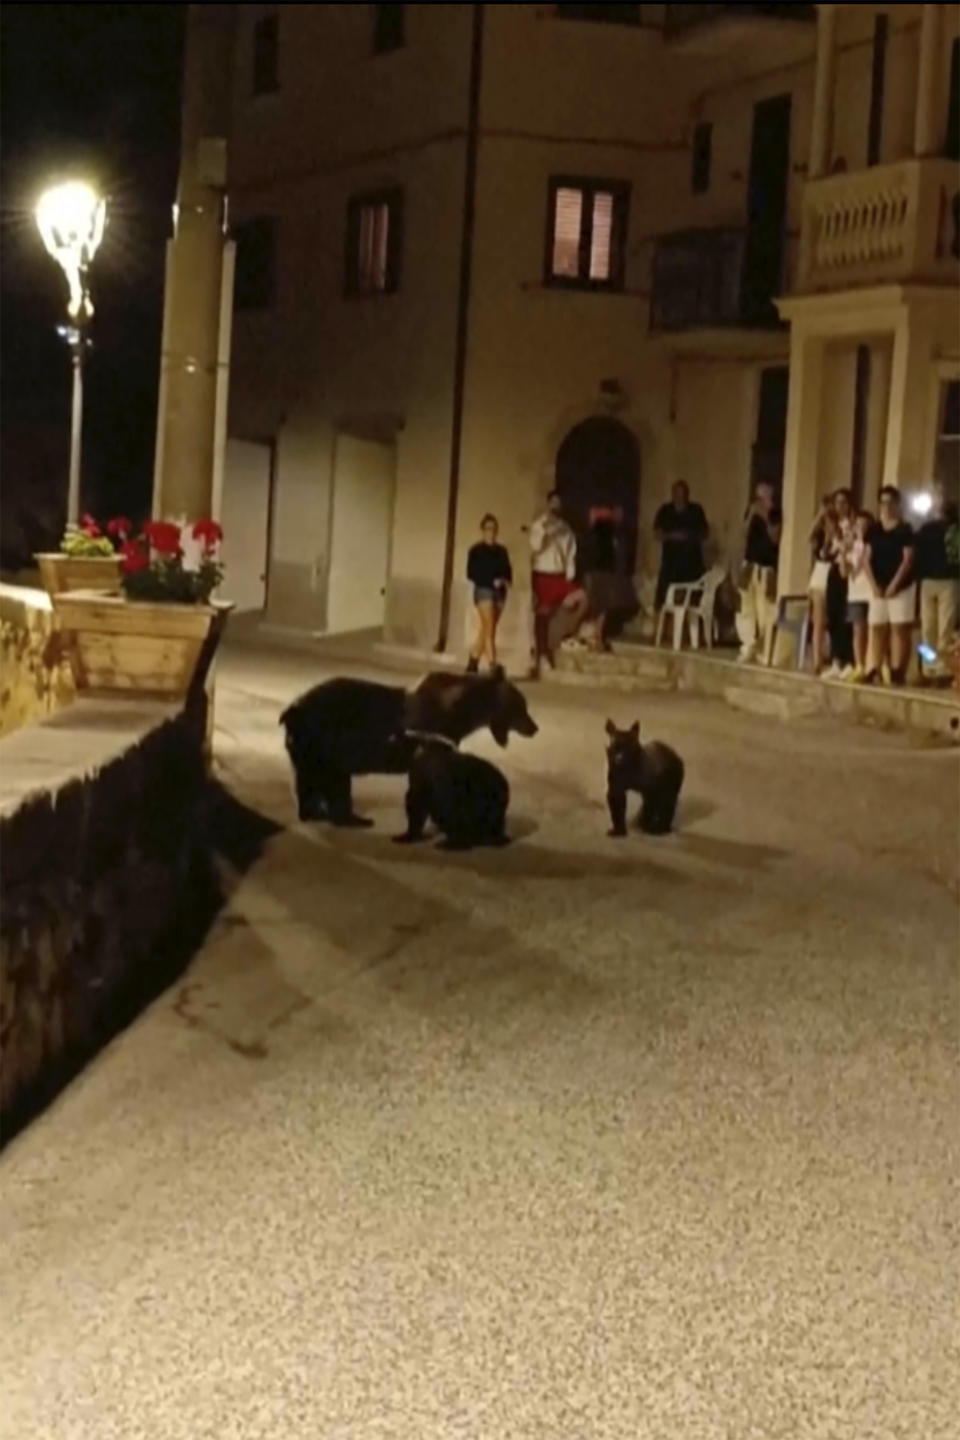 A frame grab from a footage showing a she-bear strolling with her cubs in San Sebastiano Dei Marsi, Italy, Saturday, Aug. 26 ,2023. The Italian iconic mamma bear "Amarena" was killed by rifle shots on Thursday night near San Sebastiano dei Marsi, in the Abruzzo region. The she-bear was famous for peacefully strolling around local villages with her cubs and was considered a pillar for the conservation of the Apennine brown bear in central Italy. (Via APTN)